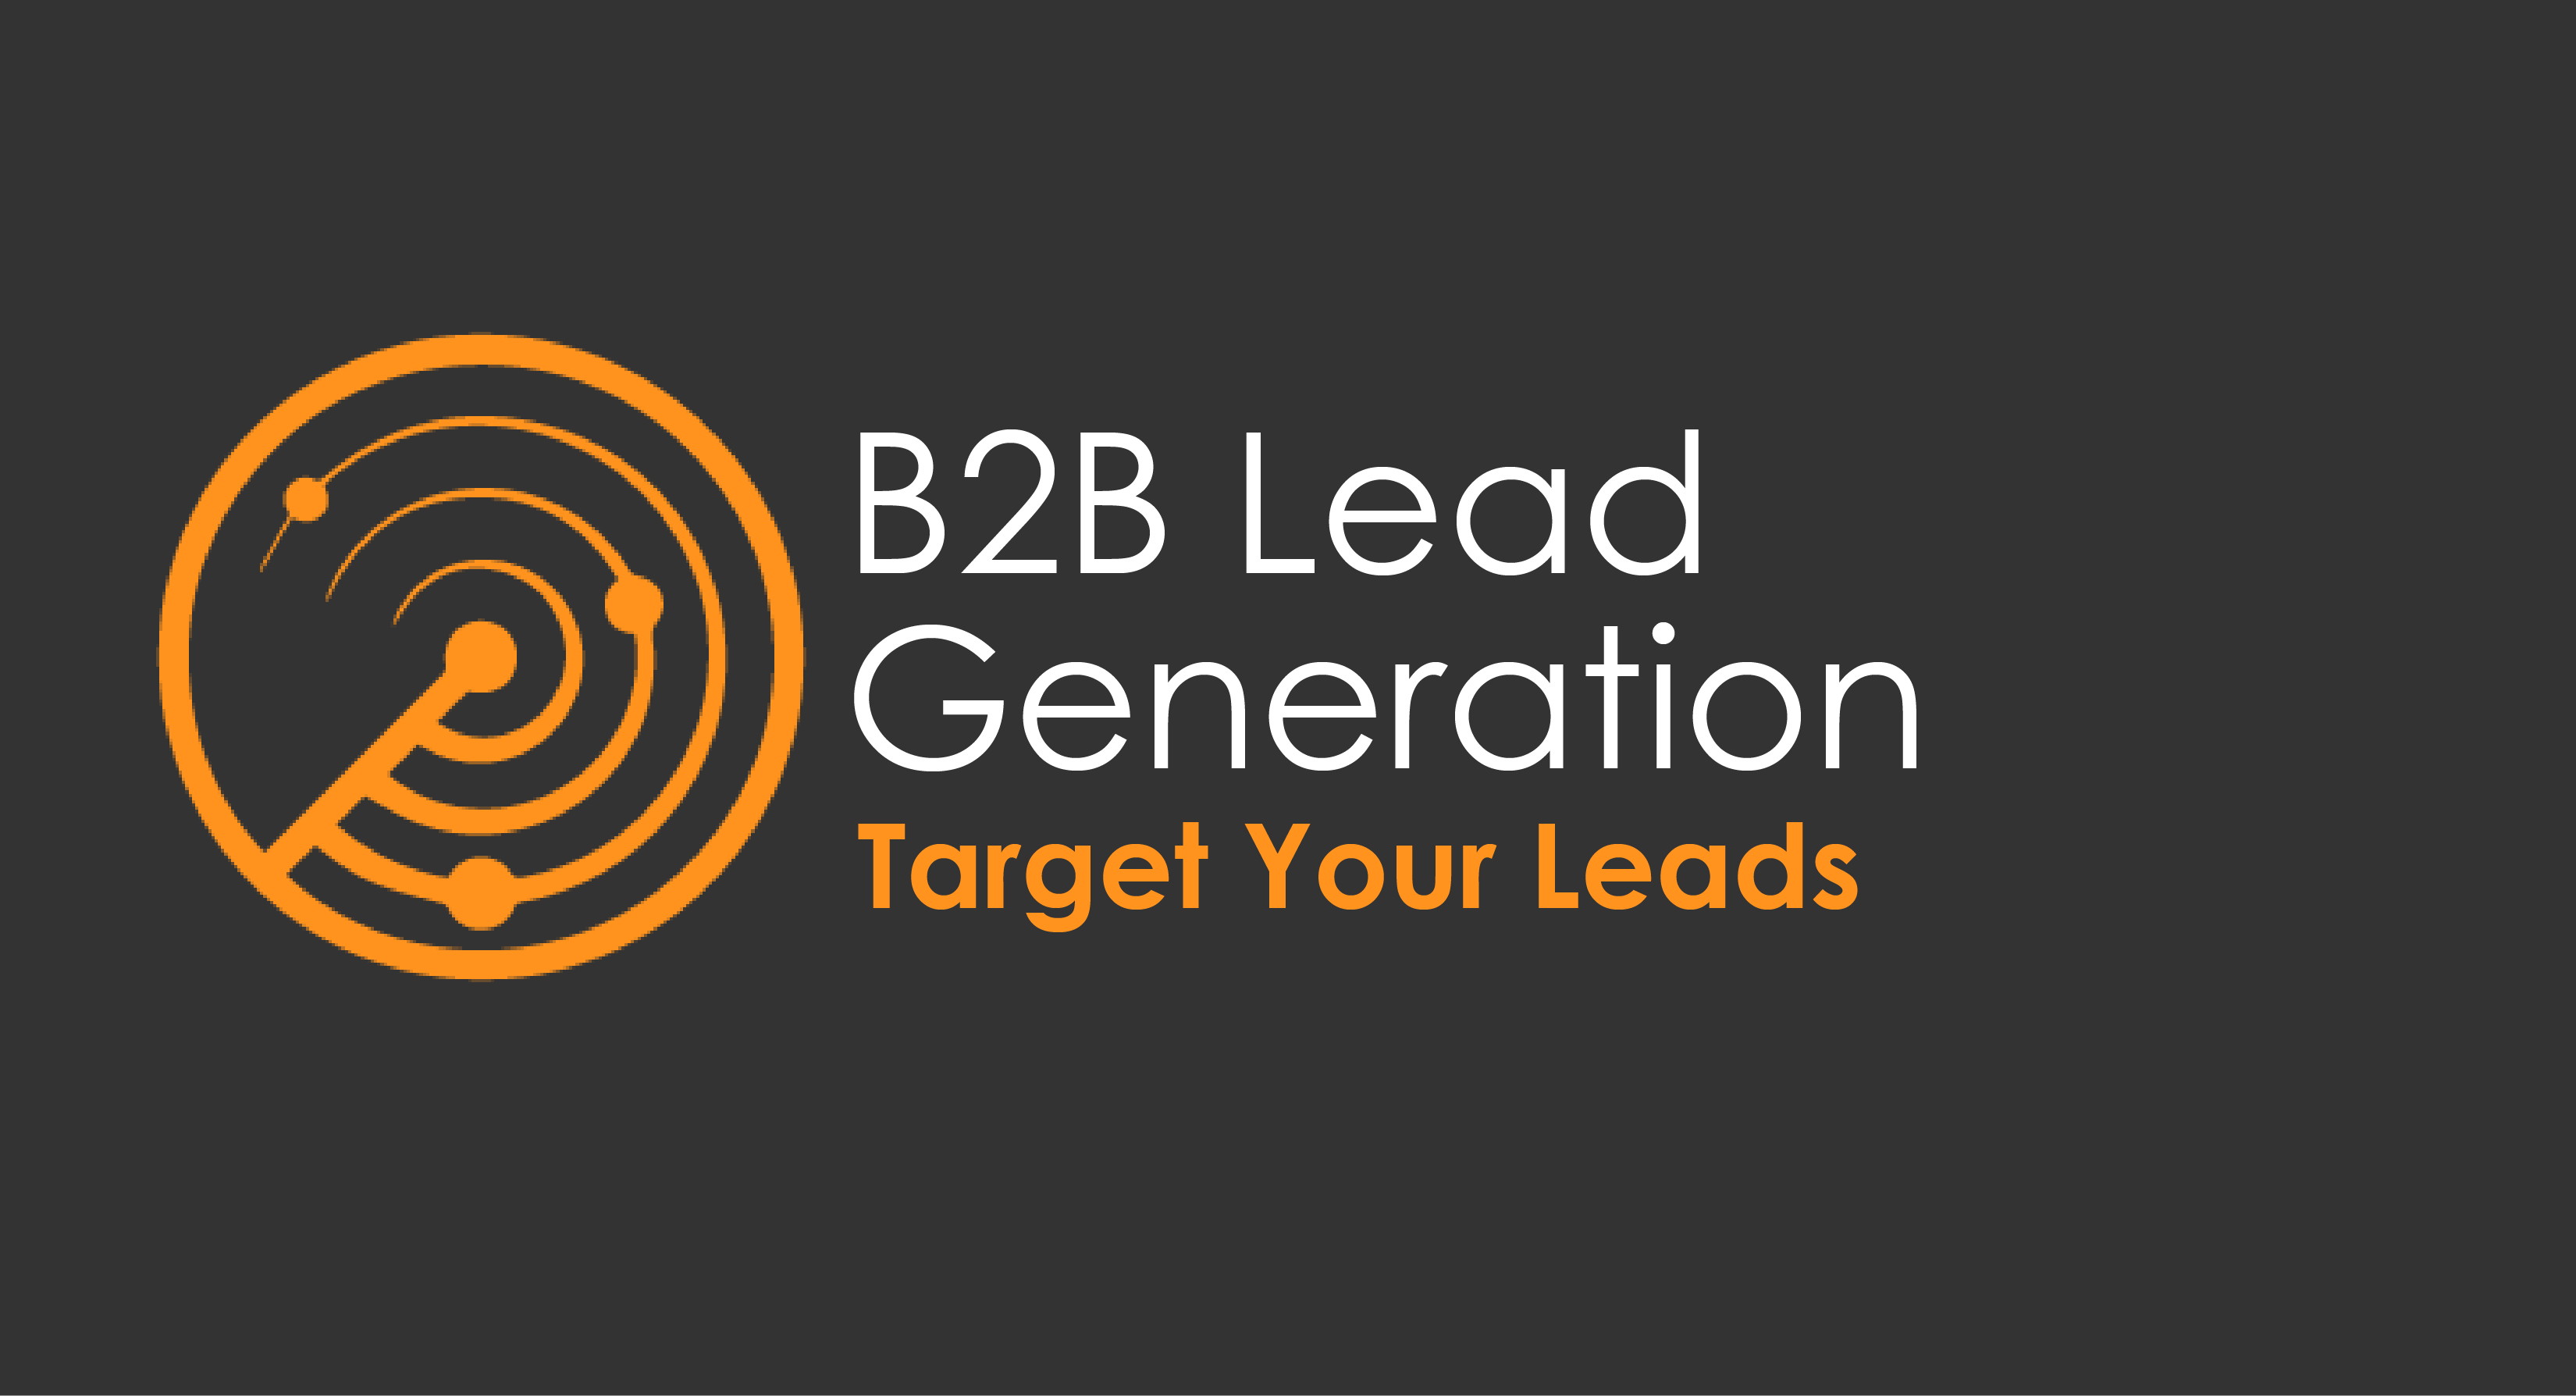 Do you need help generating leads? Check out our top 5 picks for B2B lead generation companies